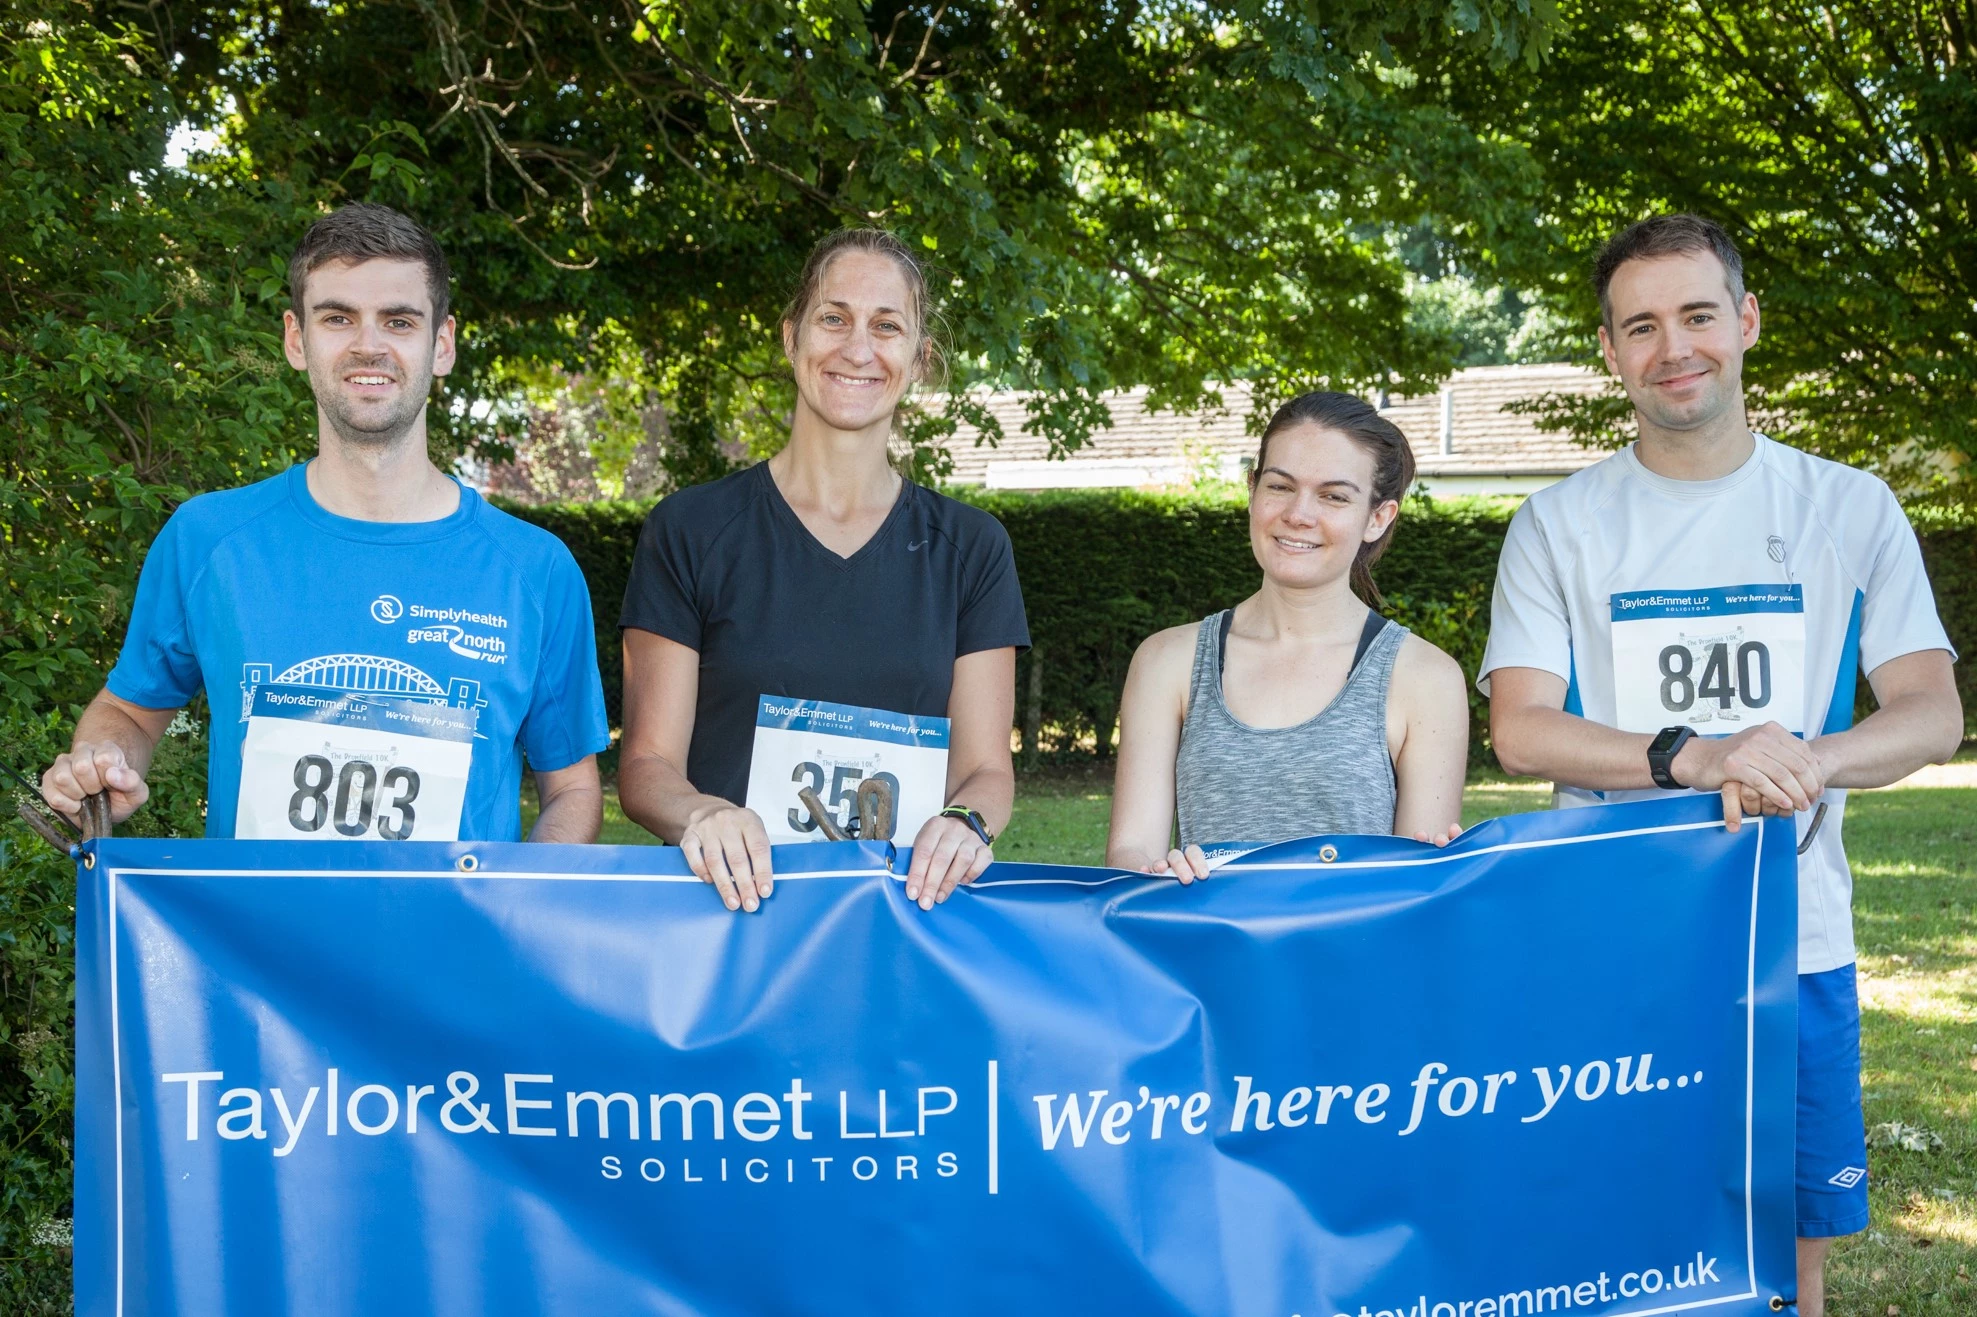 Taylor&Emmet's previous Dronfield 10K runners (left to right): Josh Proud, Sarah Gaunt, Gabriella Lathbury and Mike Robinson. 